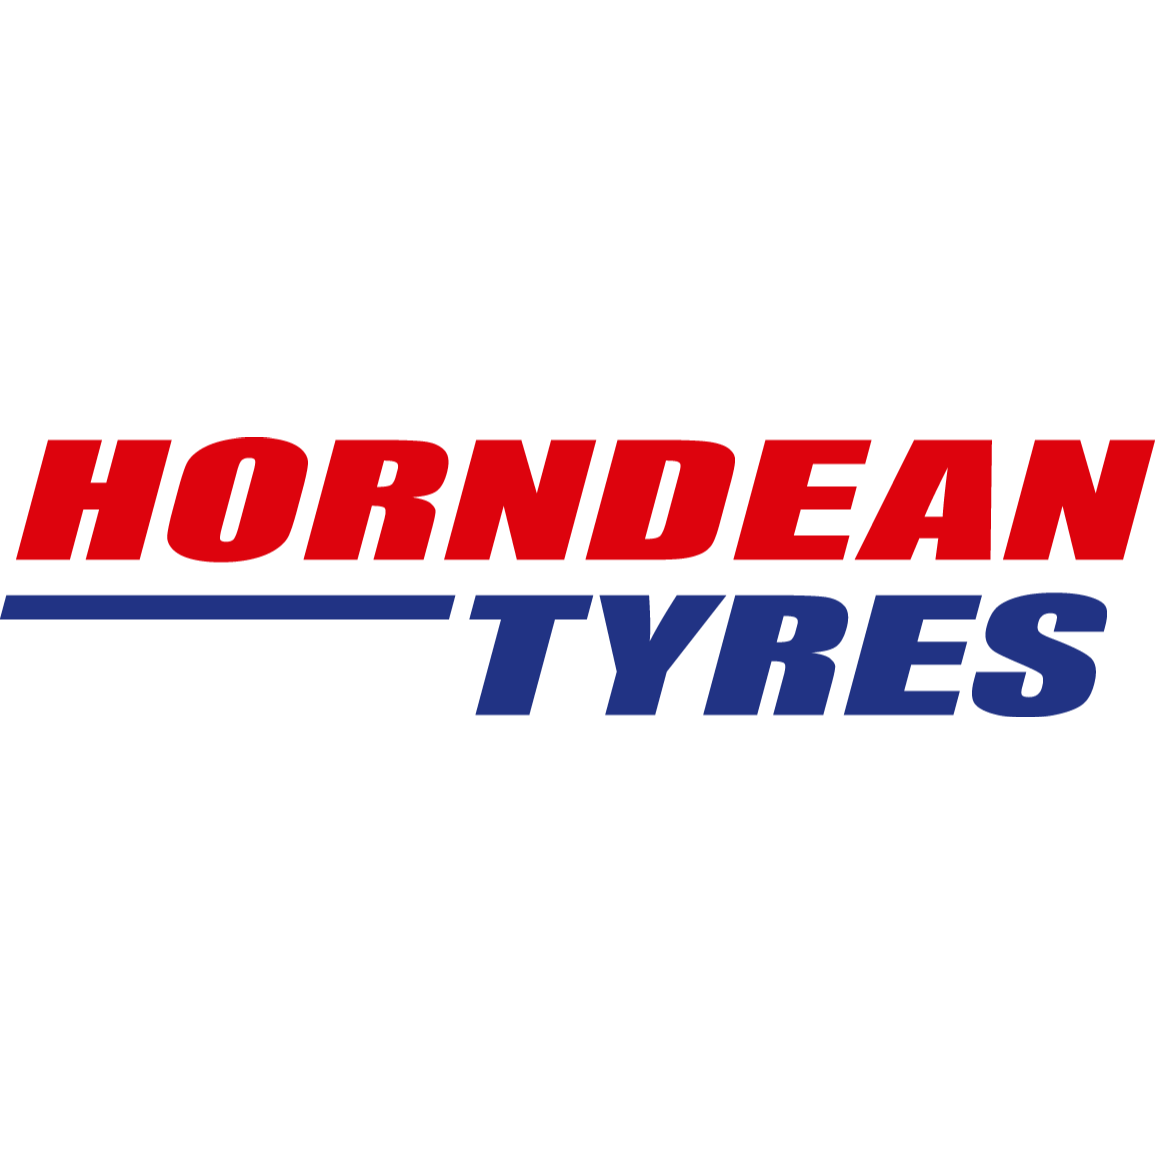 Horndean Tyre Limited - Horndean, Hampshire PO8 9JX - 02392 594928 | ShowMeLocal.com